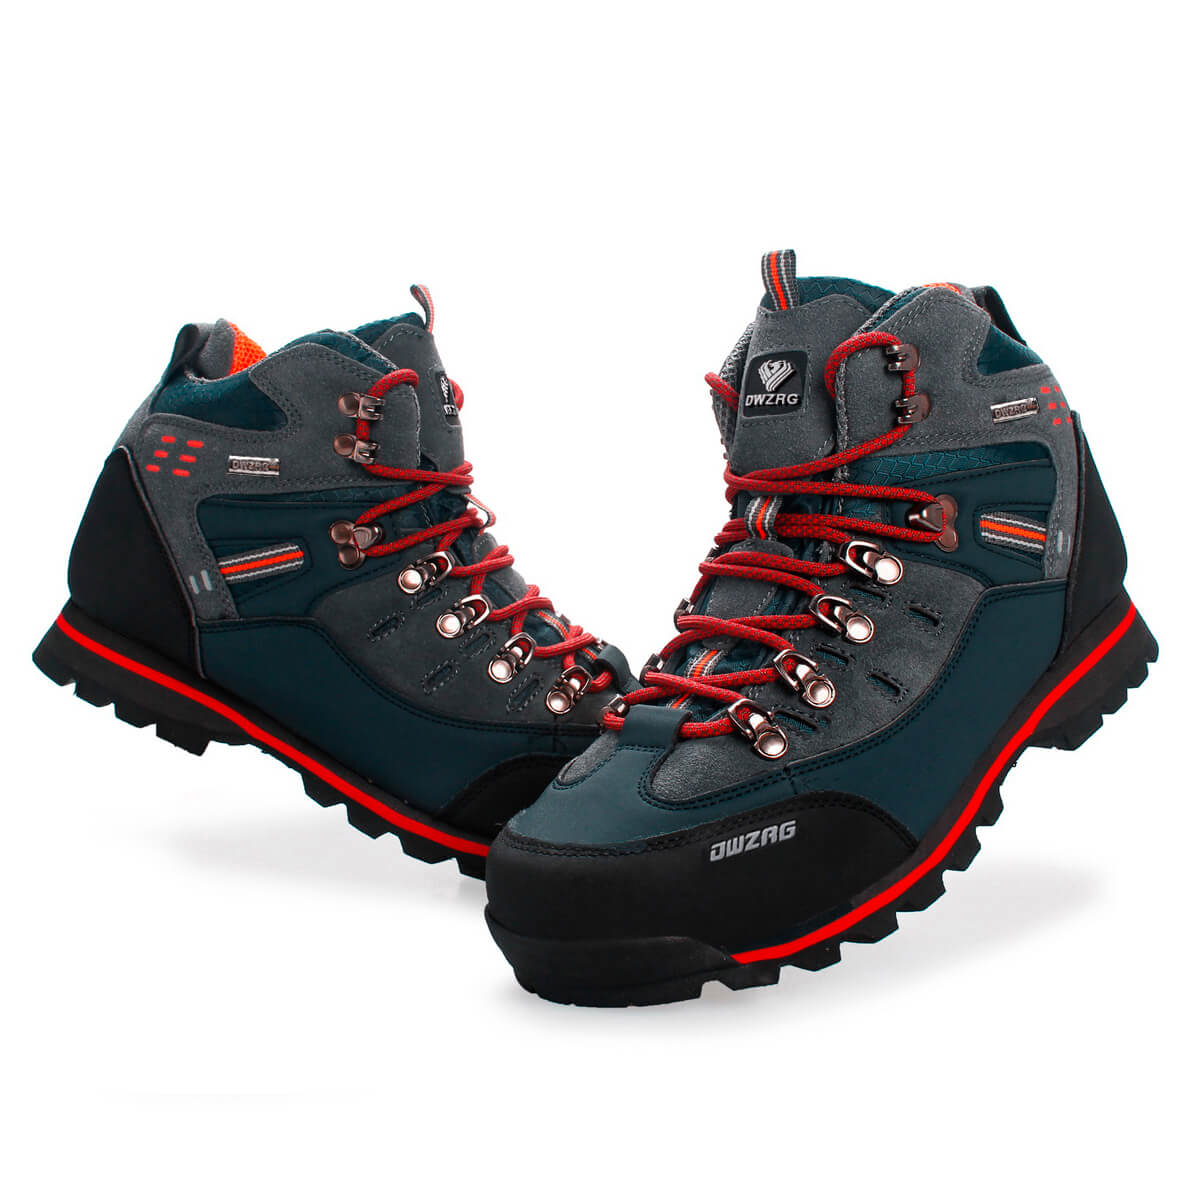 Hiking Boots for Men | 8037